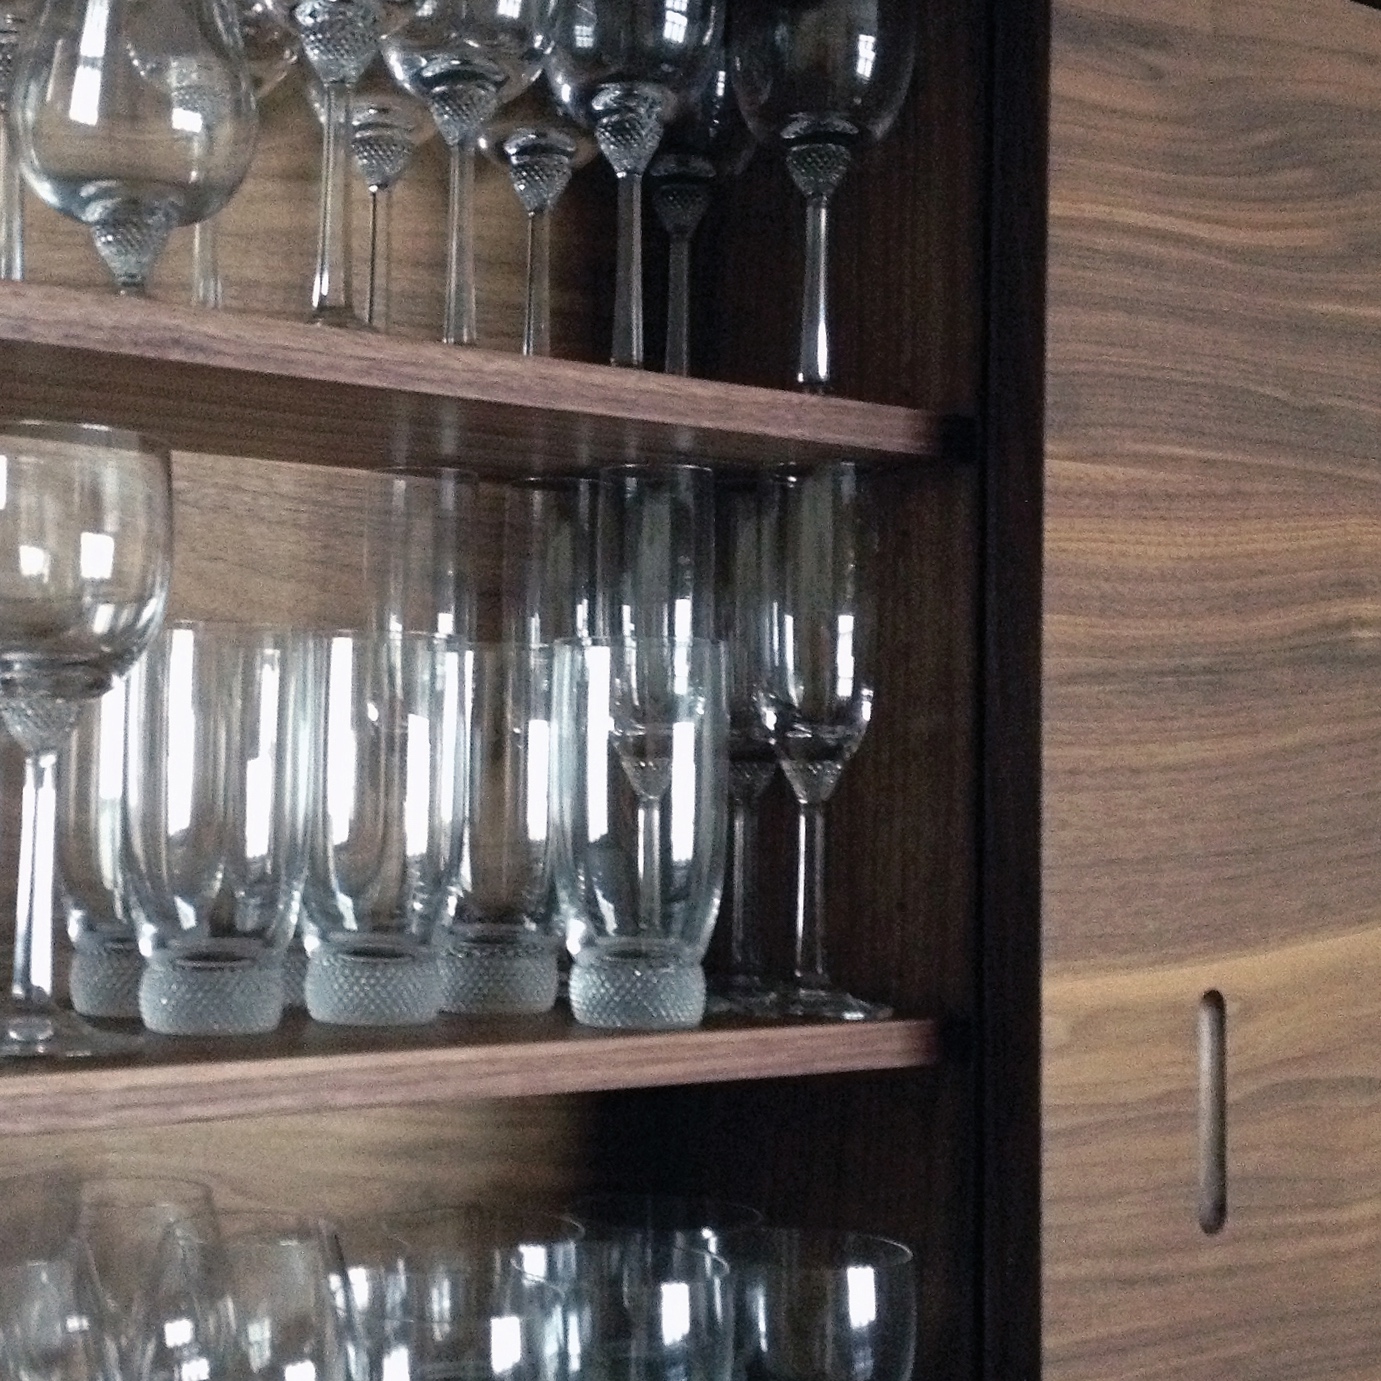 Drinks cabinet or home bar custom made in walnut including shelving for glassware.